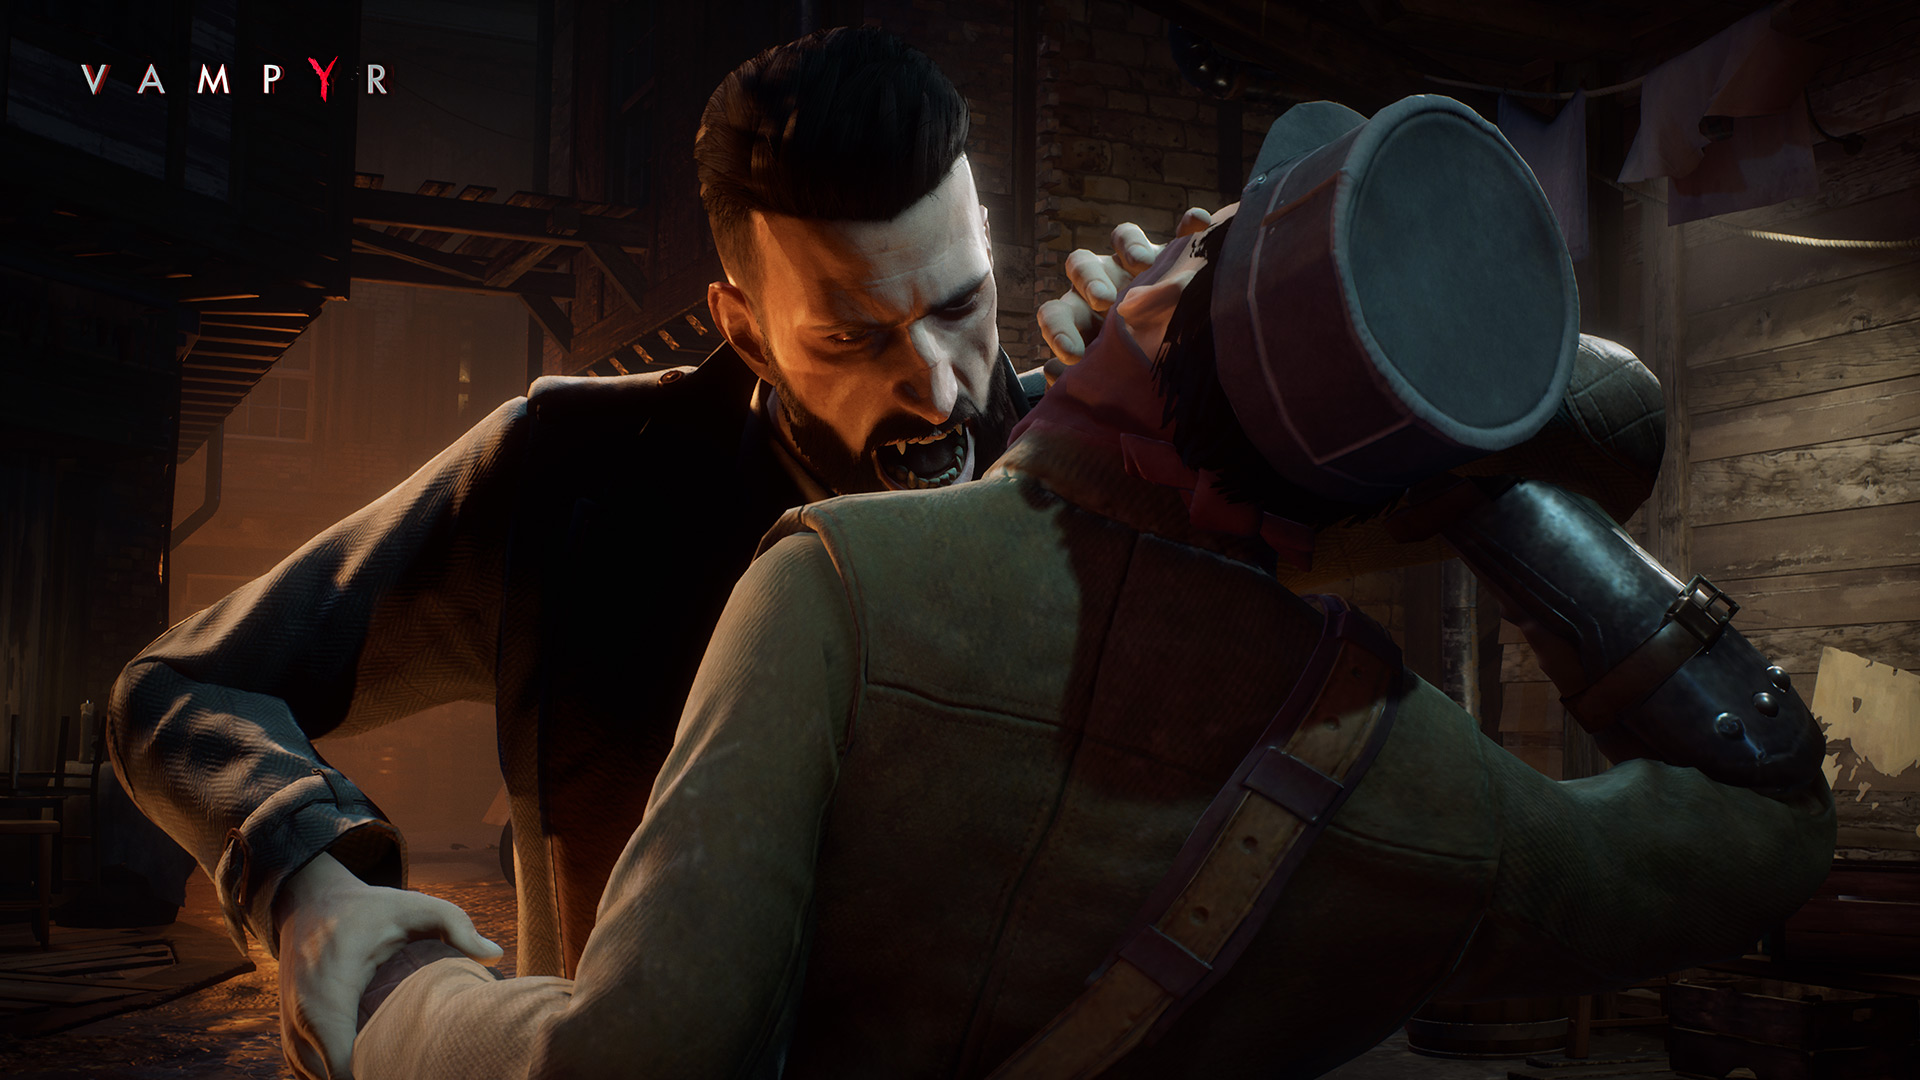 Cool Vampyr Backgrounds